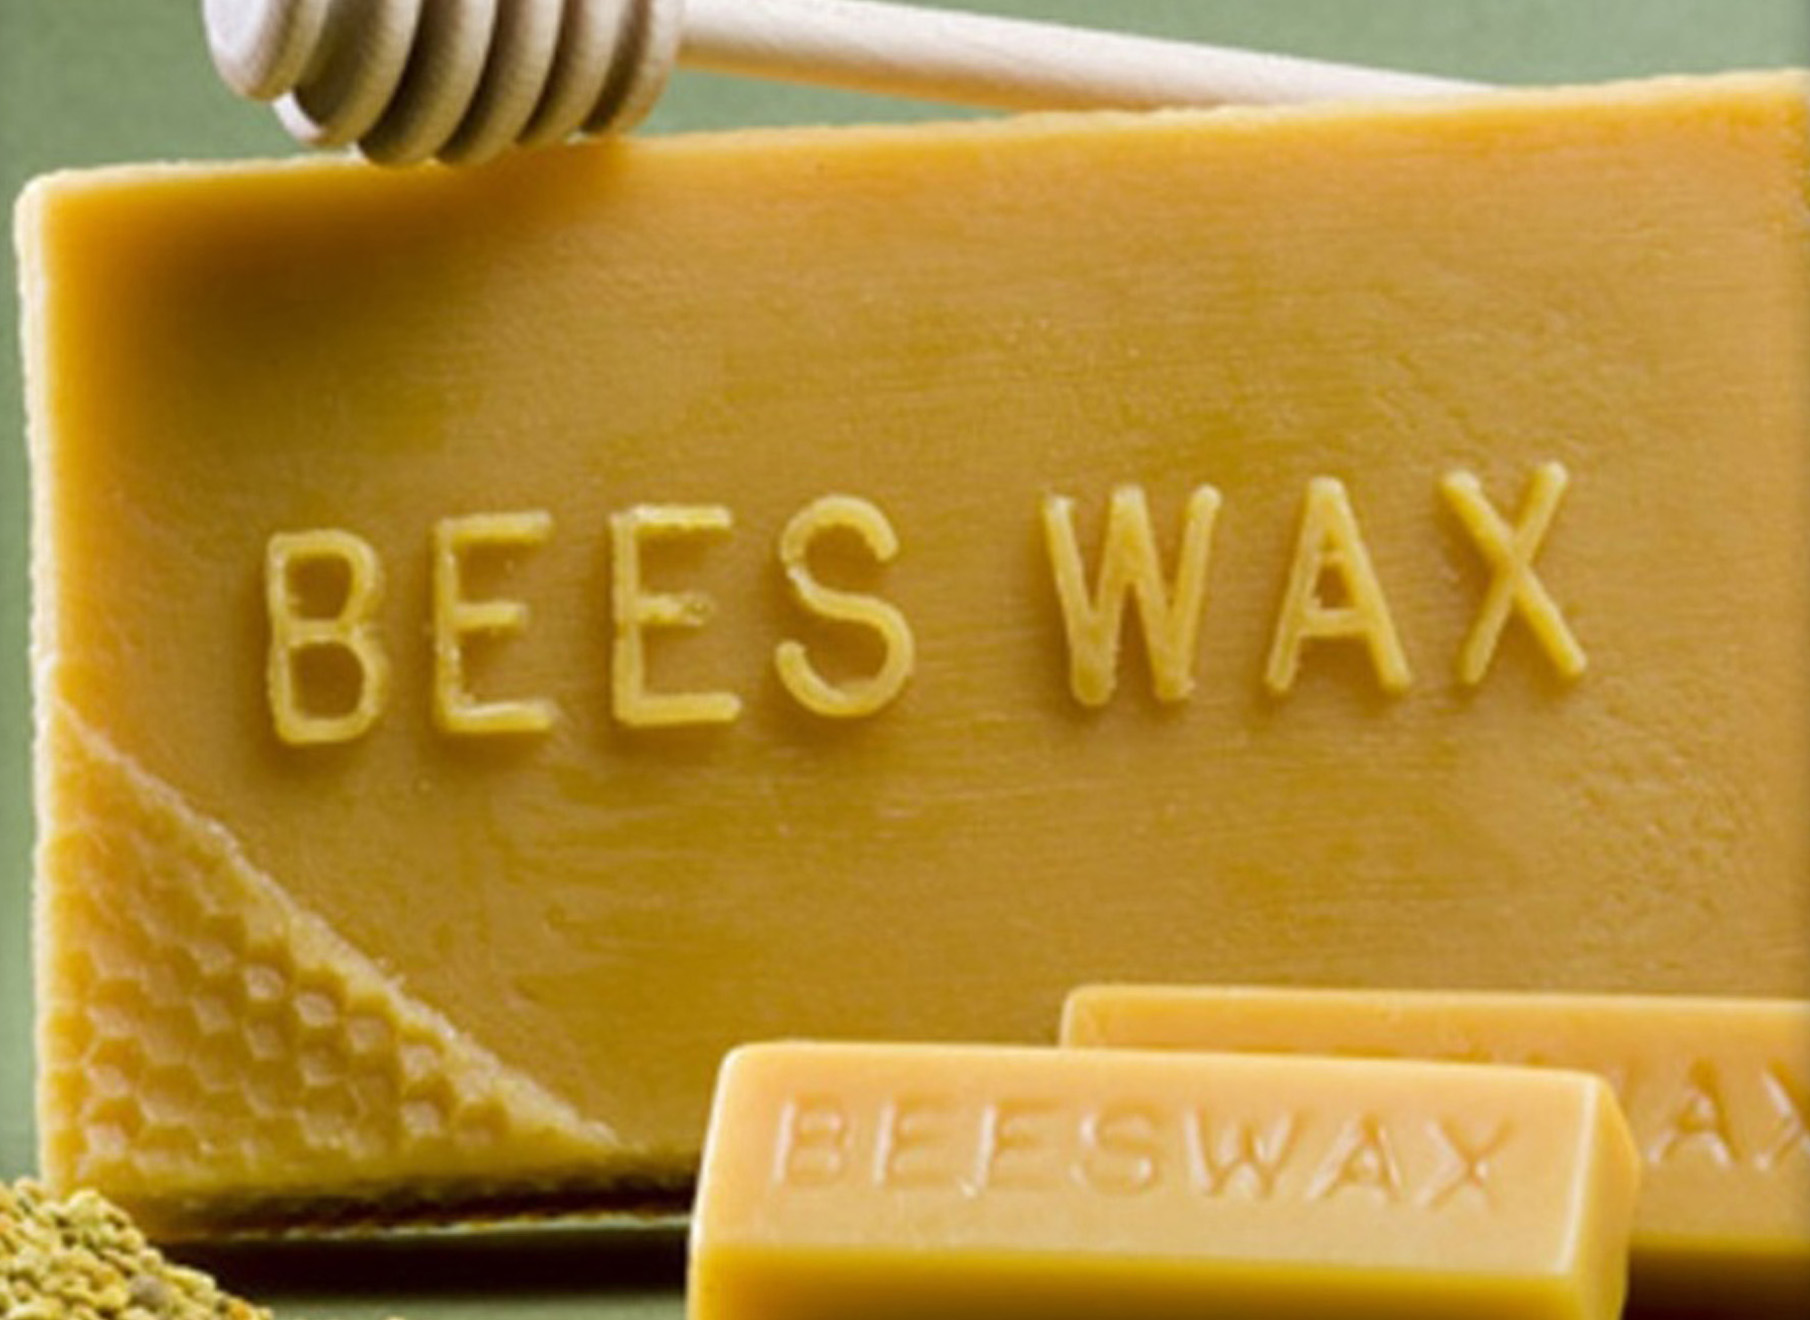 beeswax buy or exchange for foundation